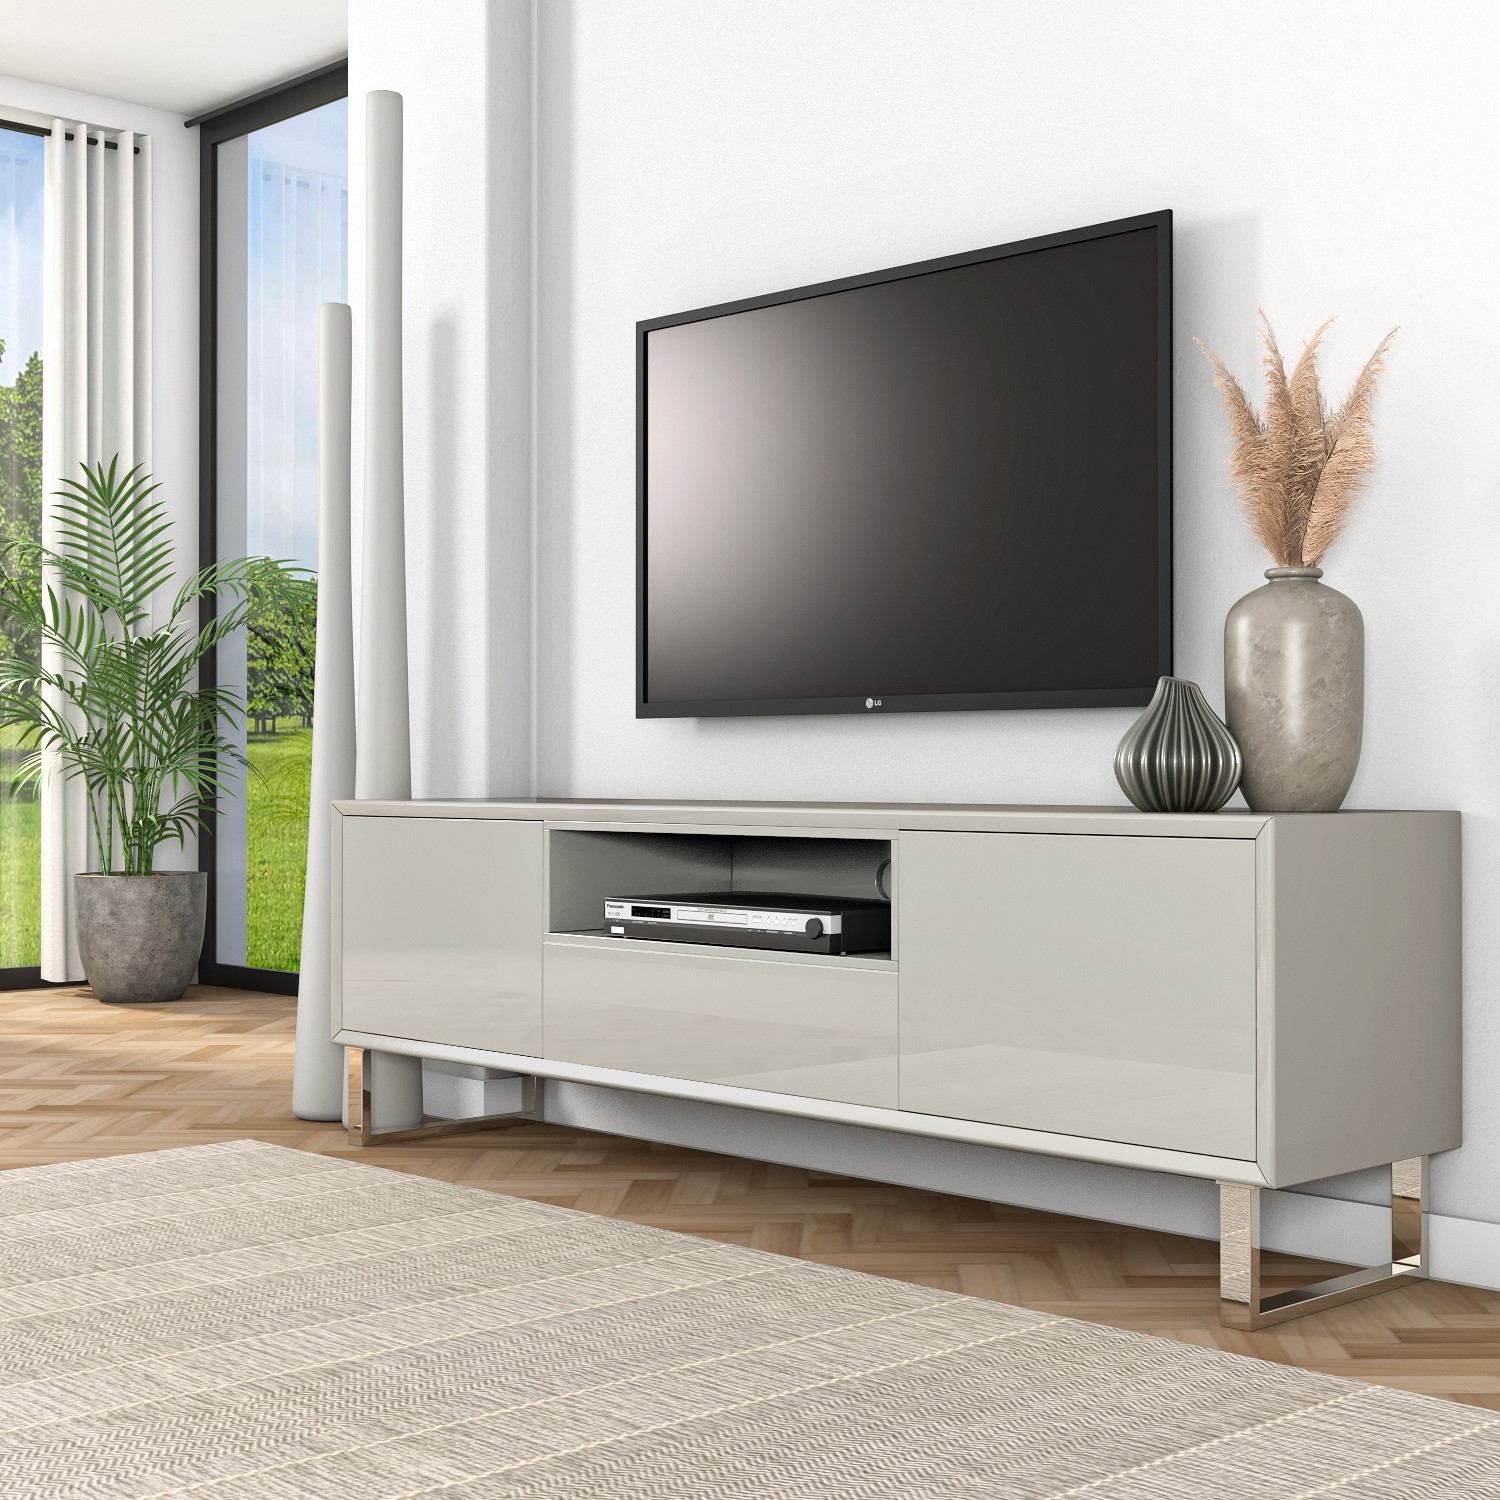 Entertainment Wall Units & Stands UK with Storage